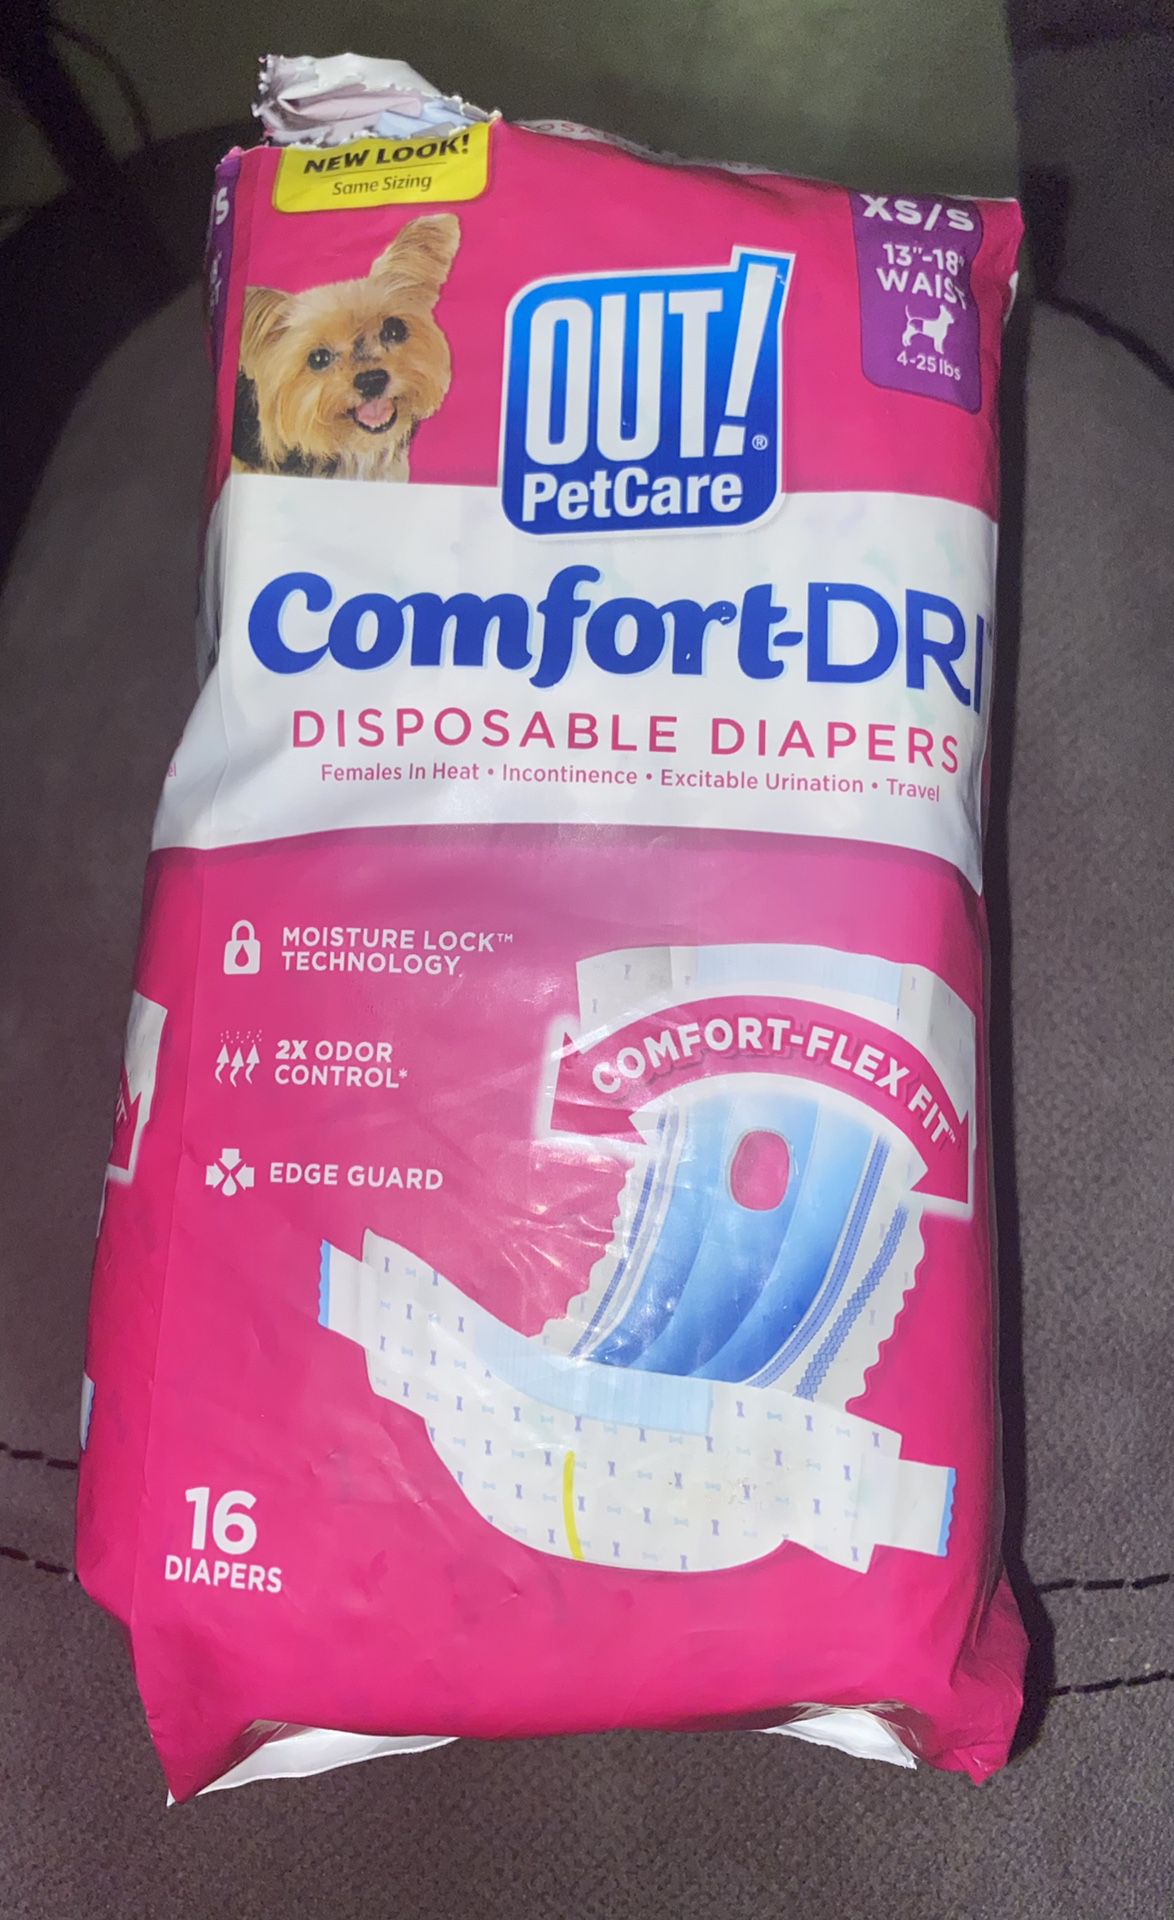 Female dog disposable diapers XS/S